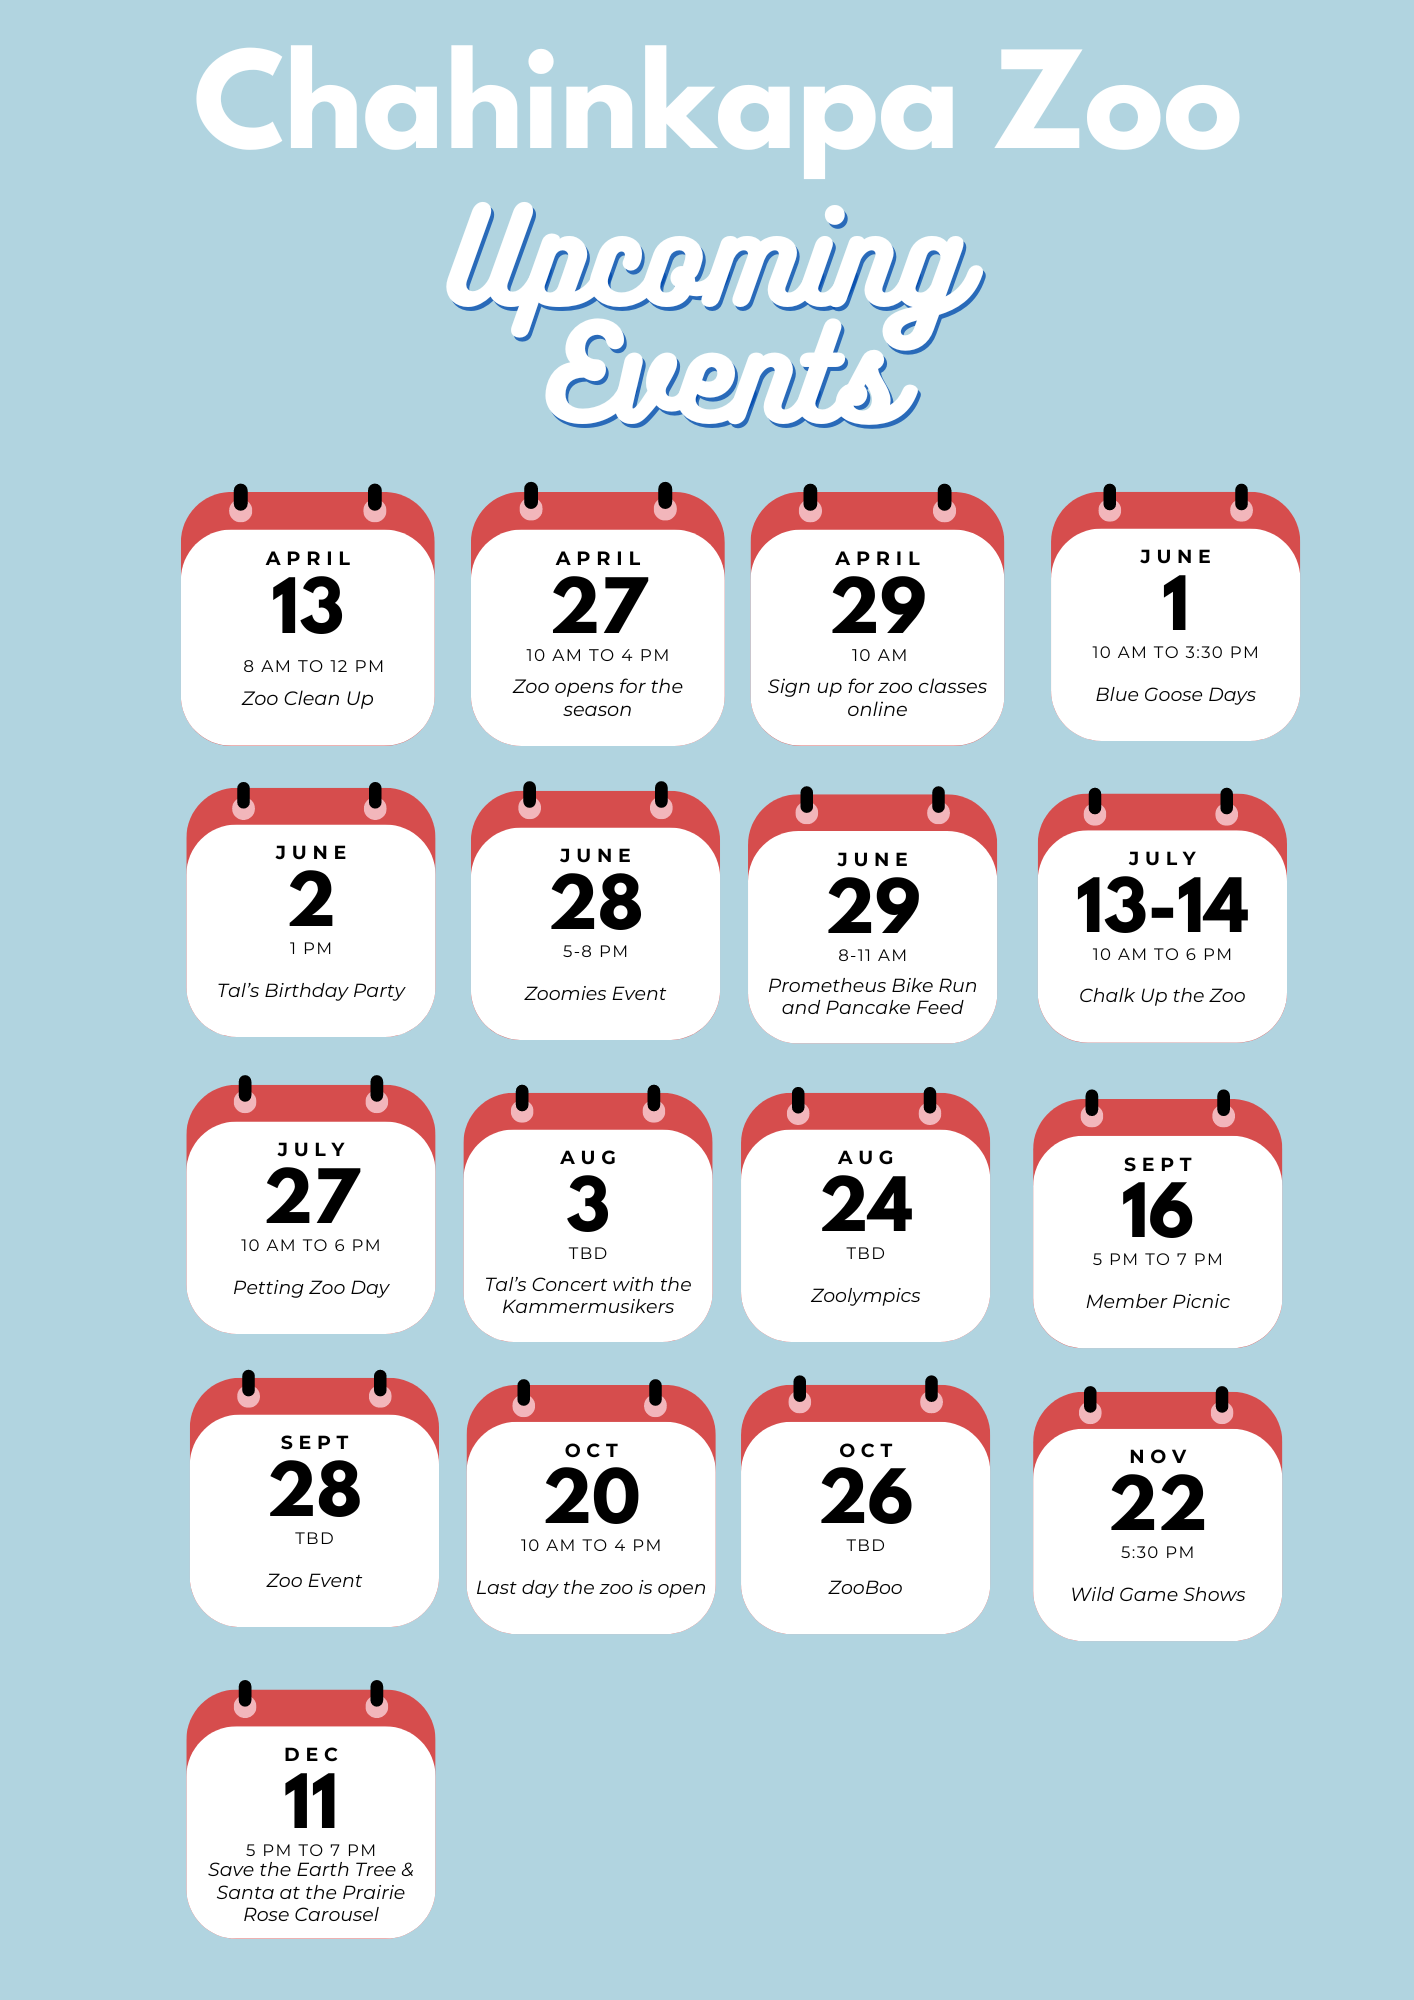 a calendar showing the upcoming events at the cahinkapa zoo .